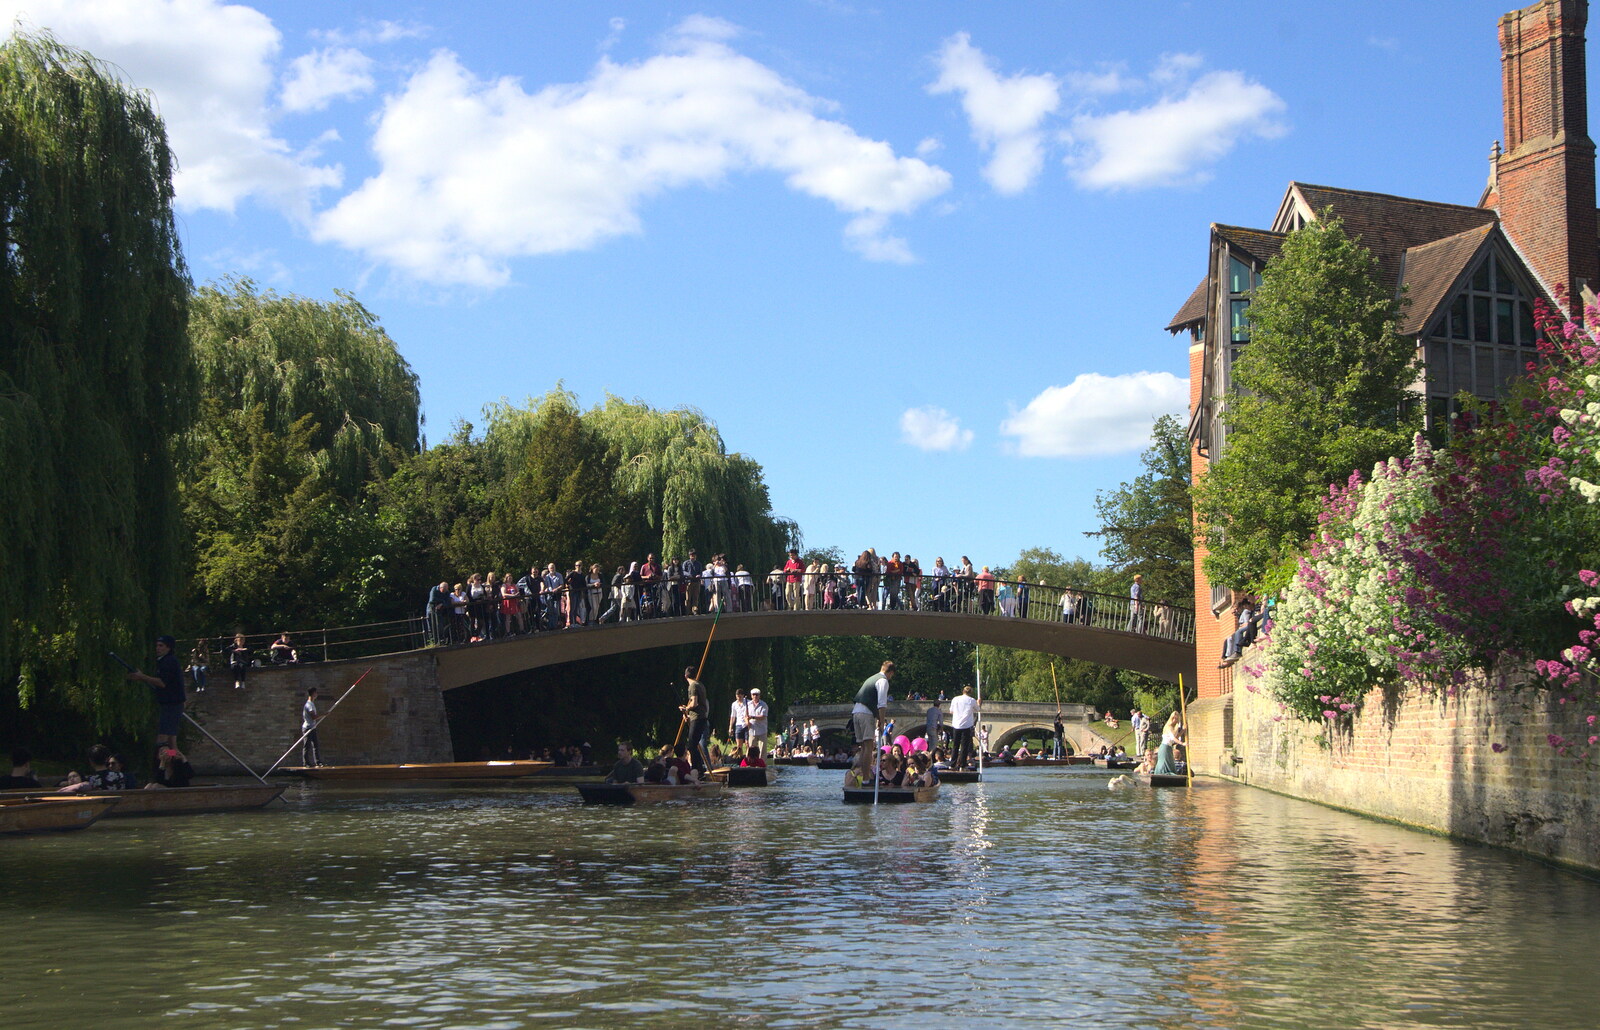 People line the bridges to watch the punts from Punting With Grandad, Cambridge, Cambridgeshire - 6th June 2015